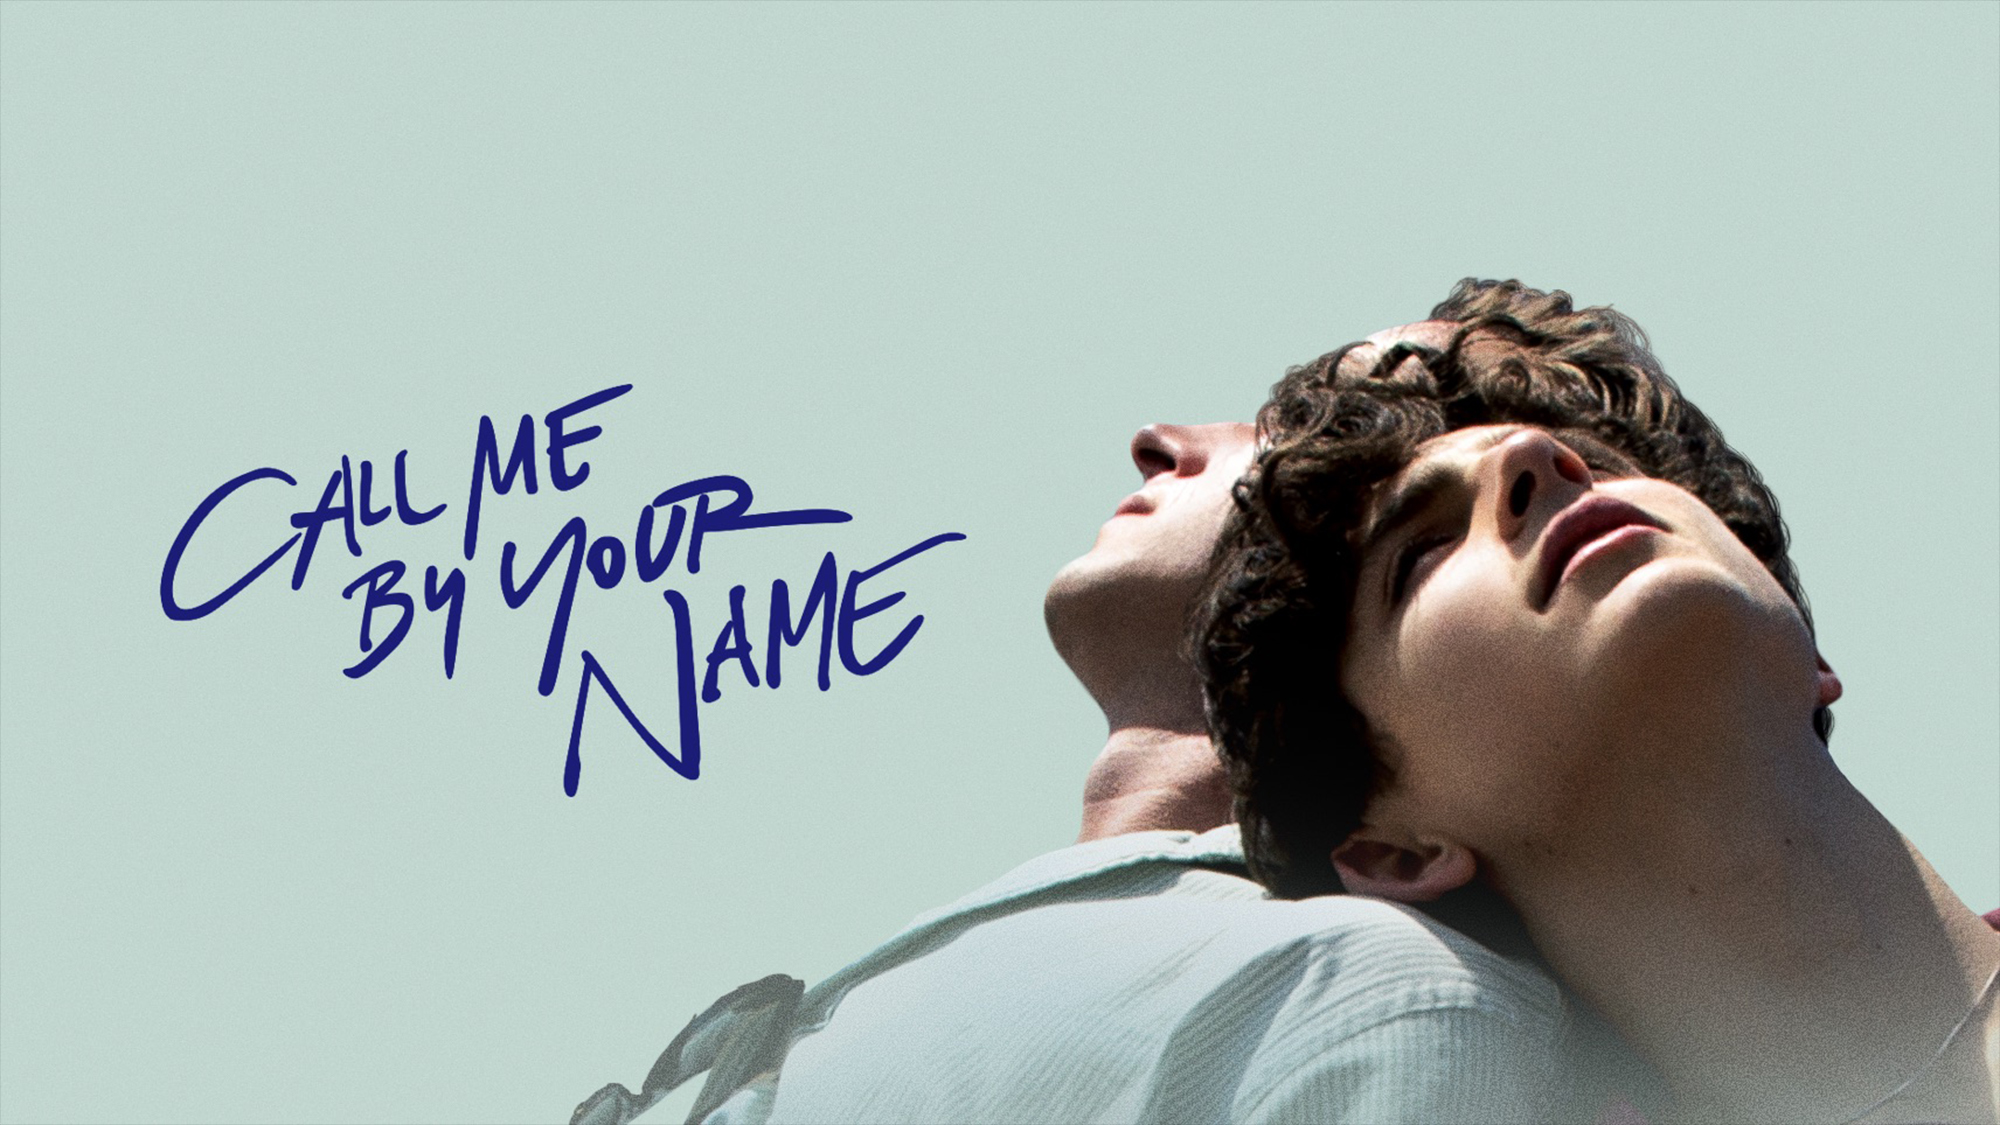 Call Me By Your Name Wallpaper  cmbyn  Wallpaper  Name wallpaper Call me  Your name wallpaper